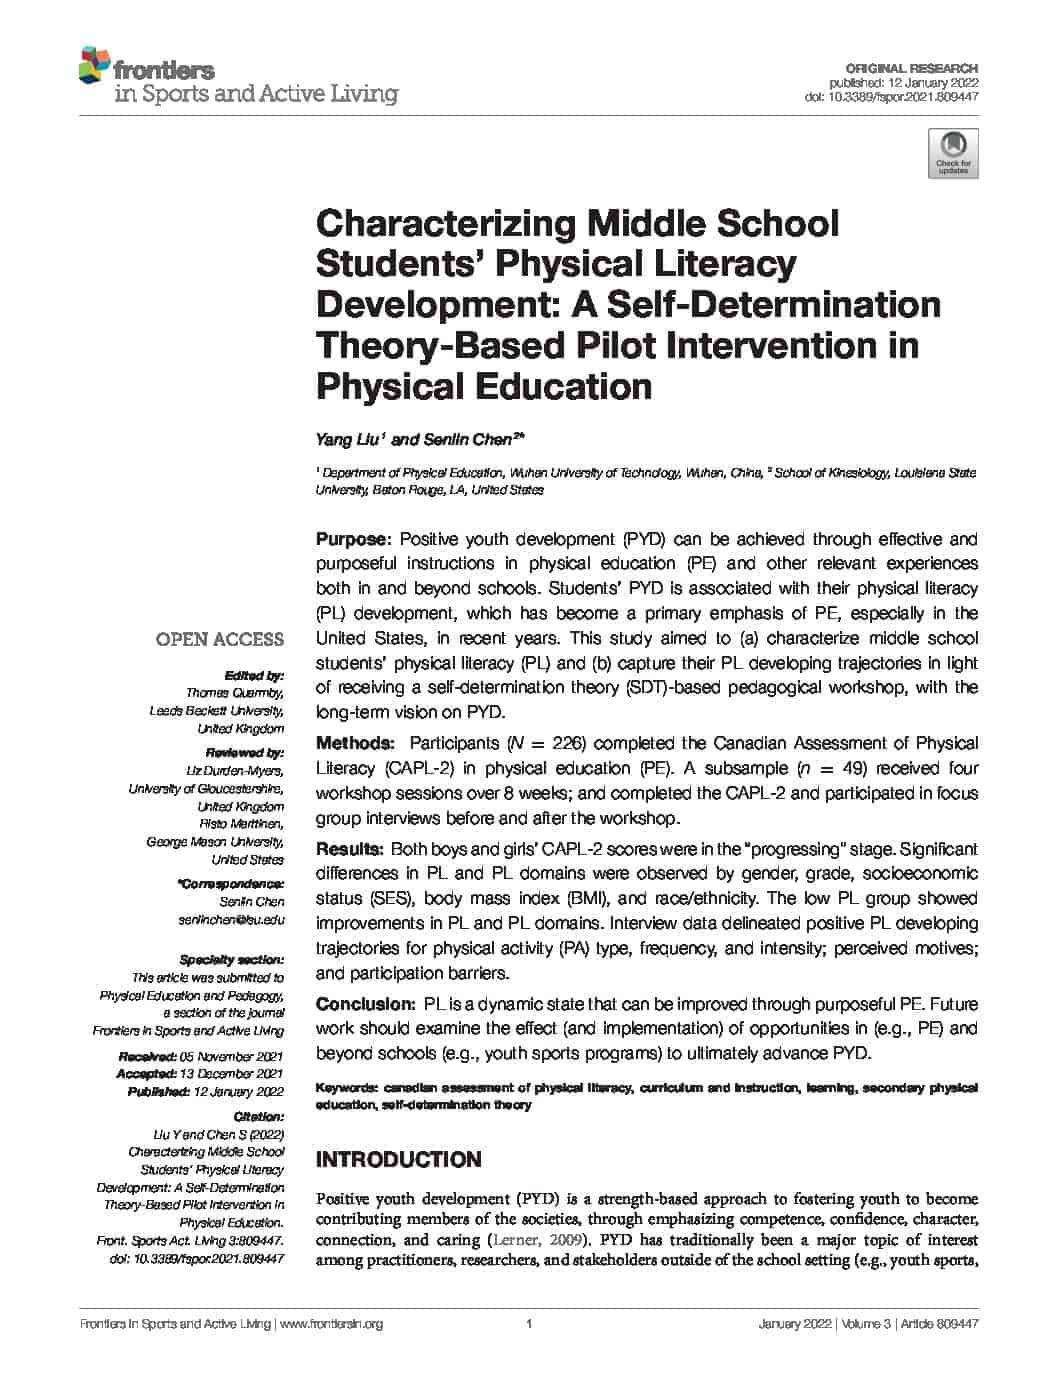 Characterising Middle School Students’ Physical Literacy Development: A Self-Determination Theory-Based Pilot Intervention in Physical Education